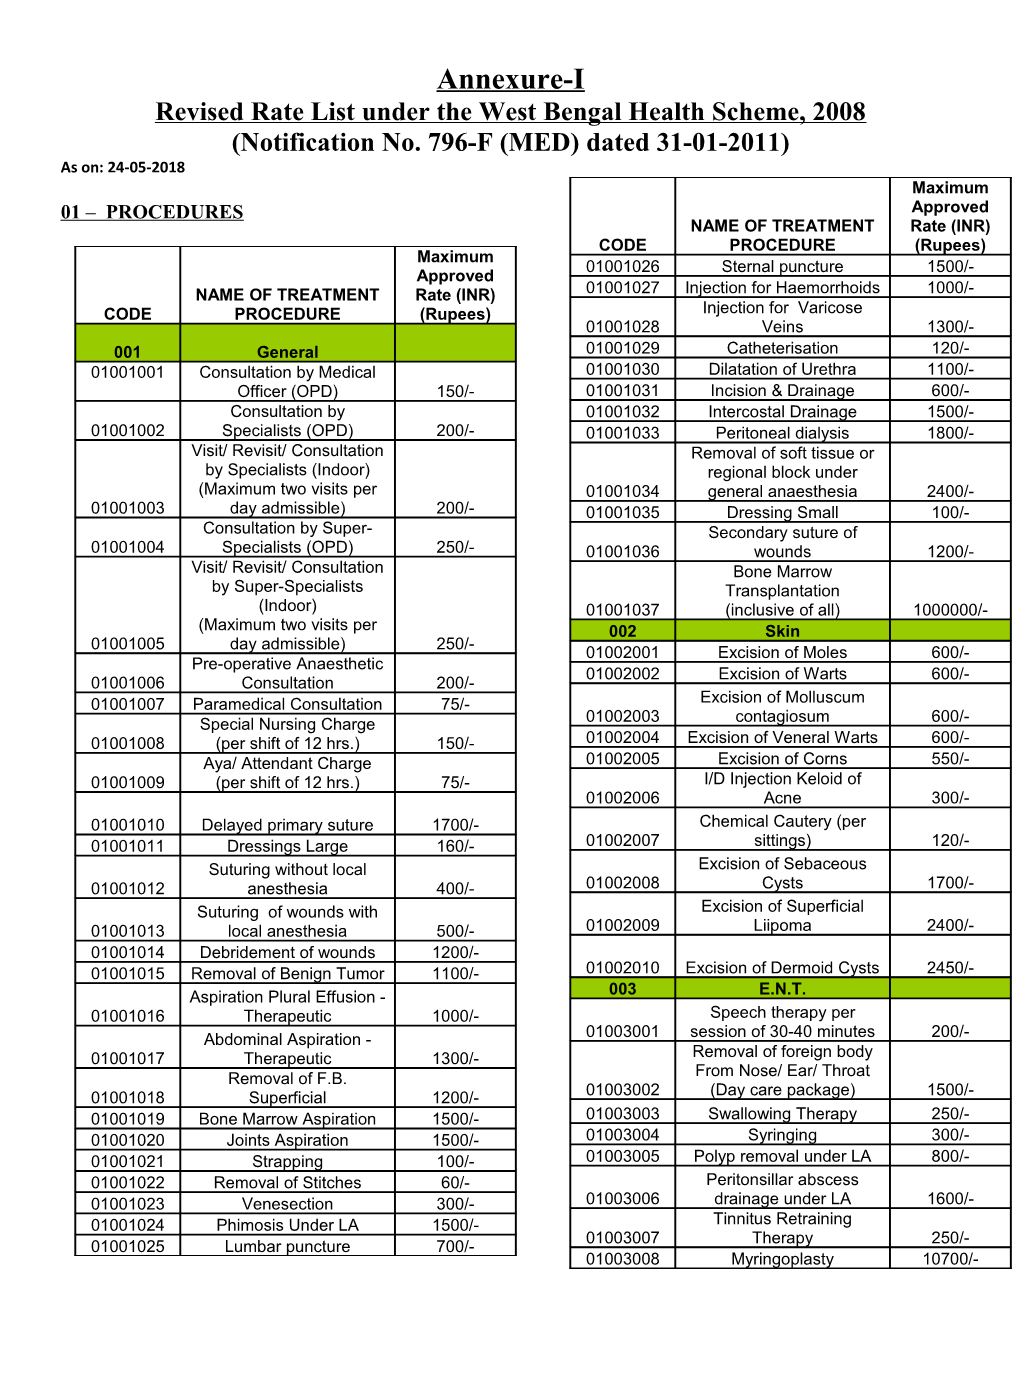 Revised Rate List Under the West Bengal Health Scheme, 2008